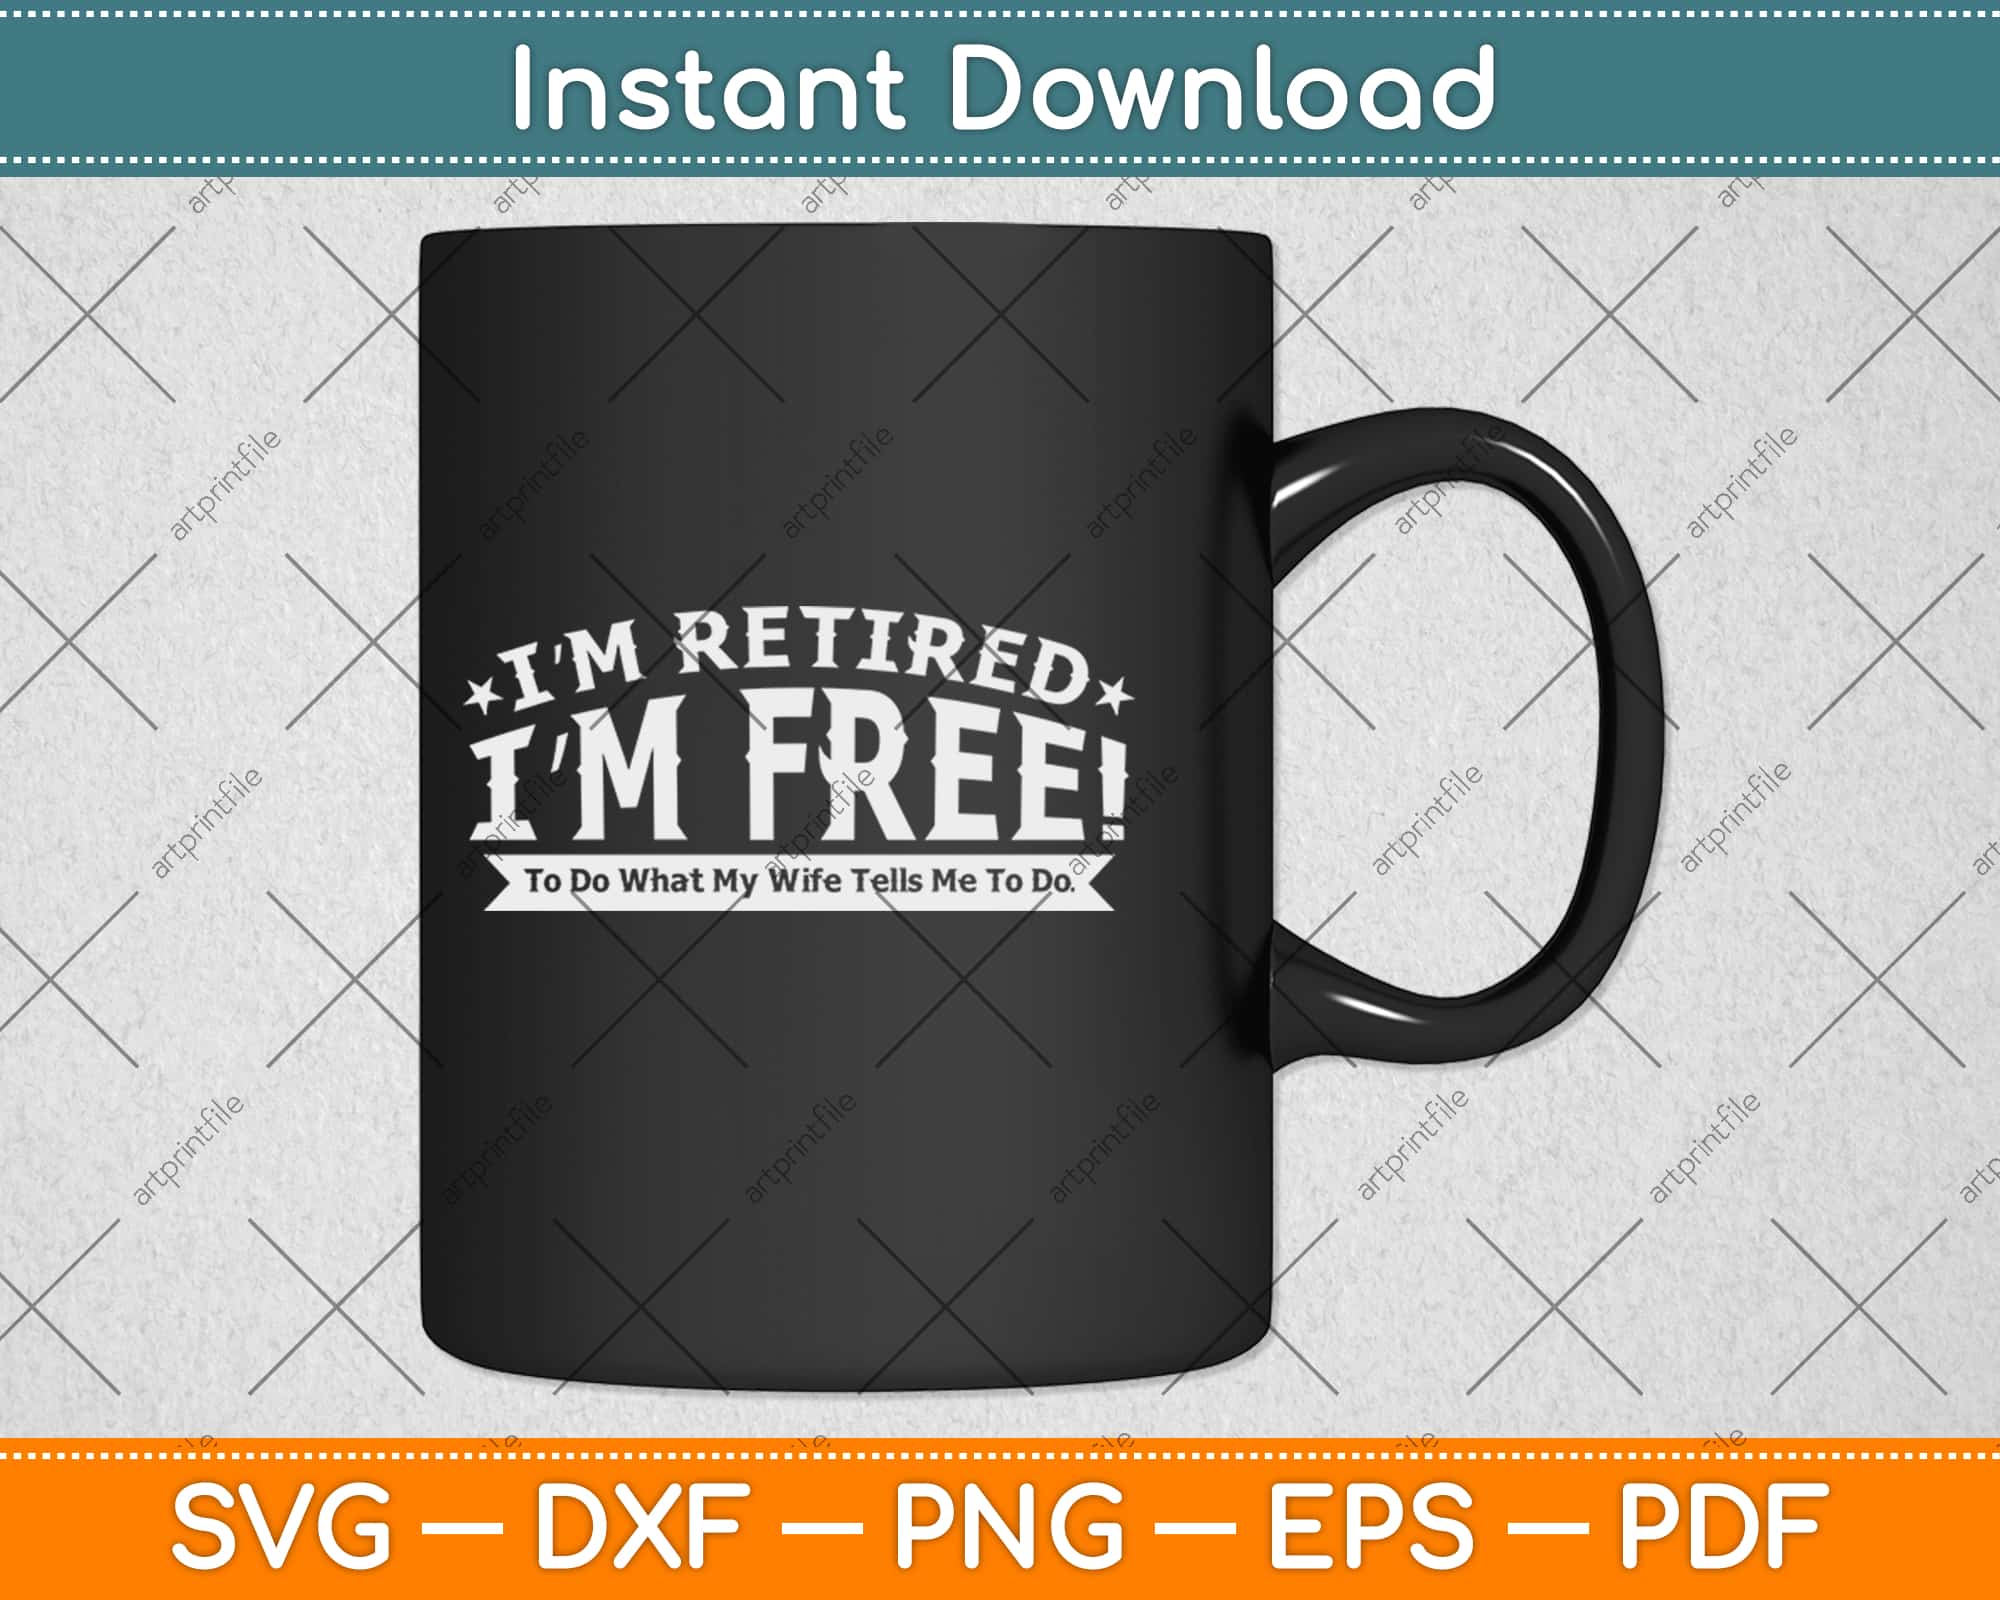 Discover more than 217 funny retirement gift ideas